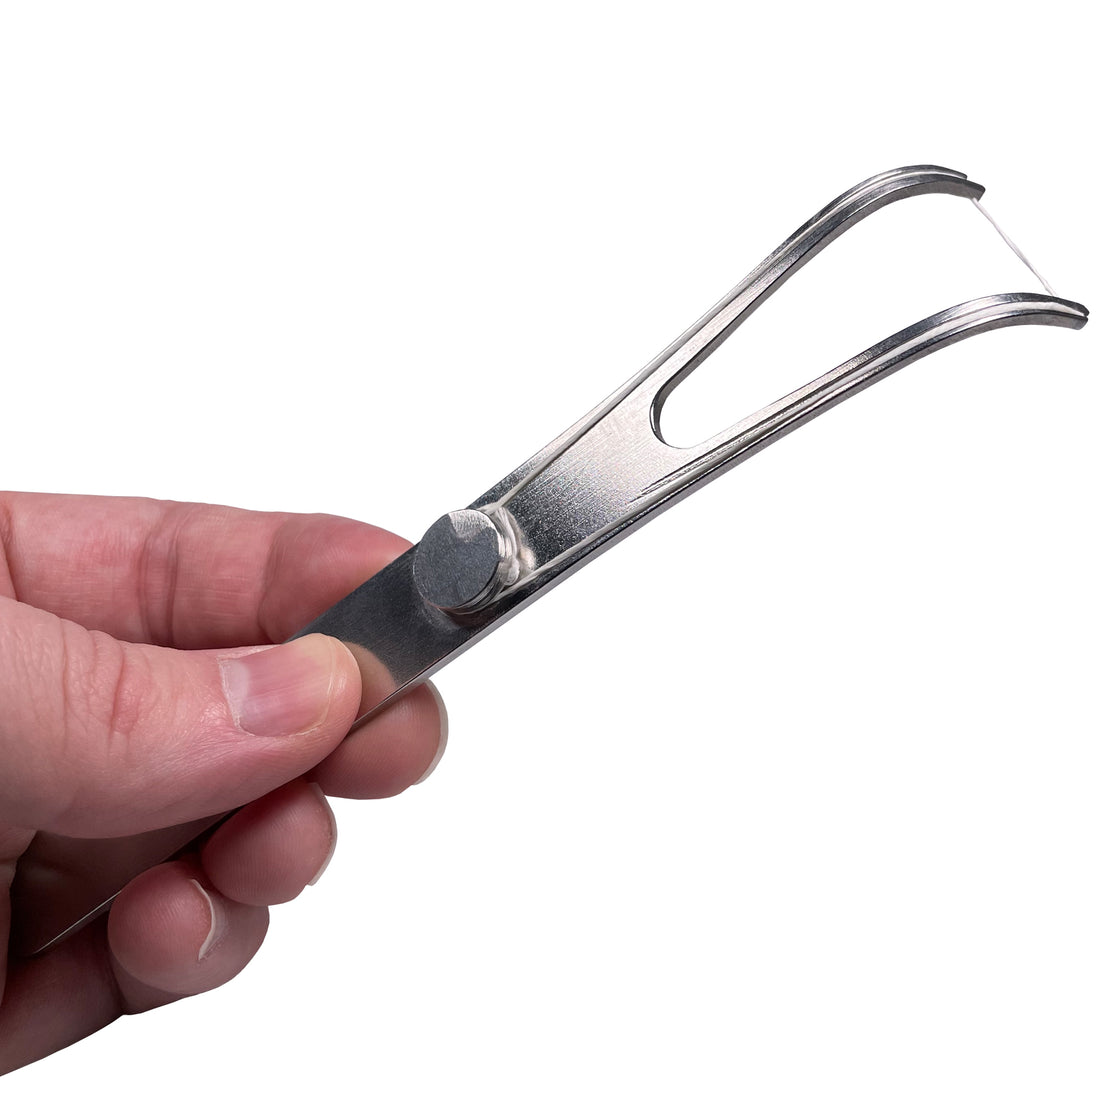 Dental Lace Refillable Flosser (Available for Pre-Order) (Back in Stock Mid-Late April)